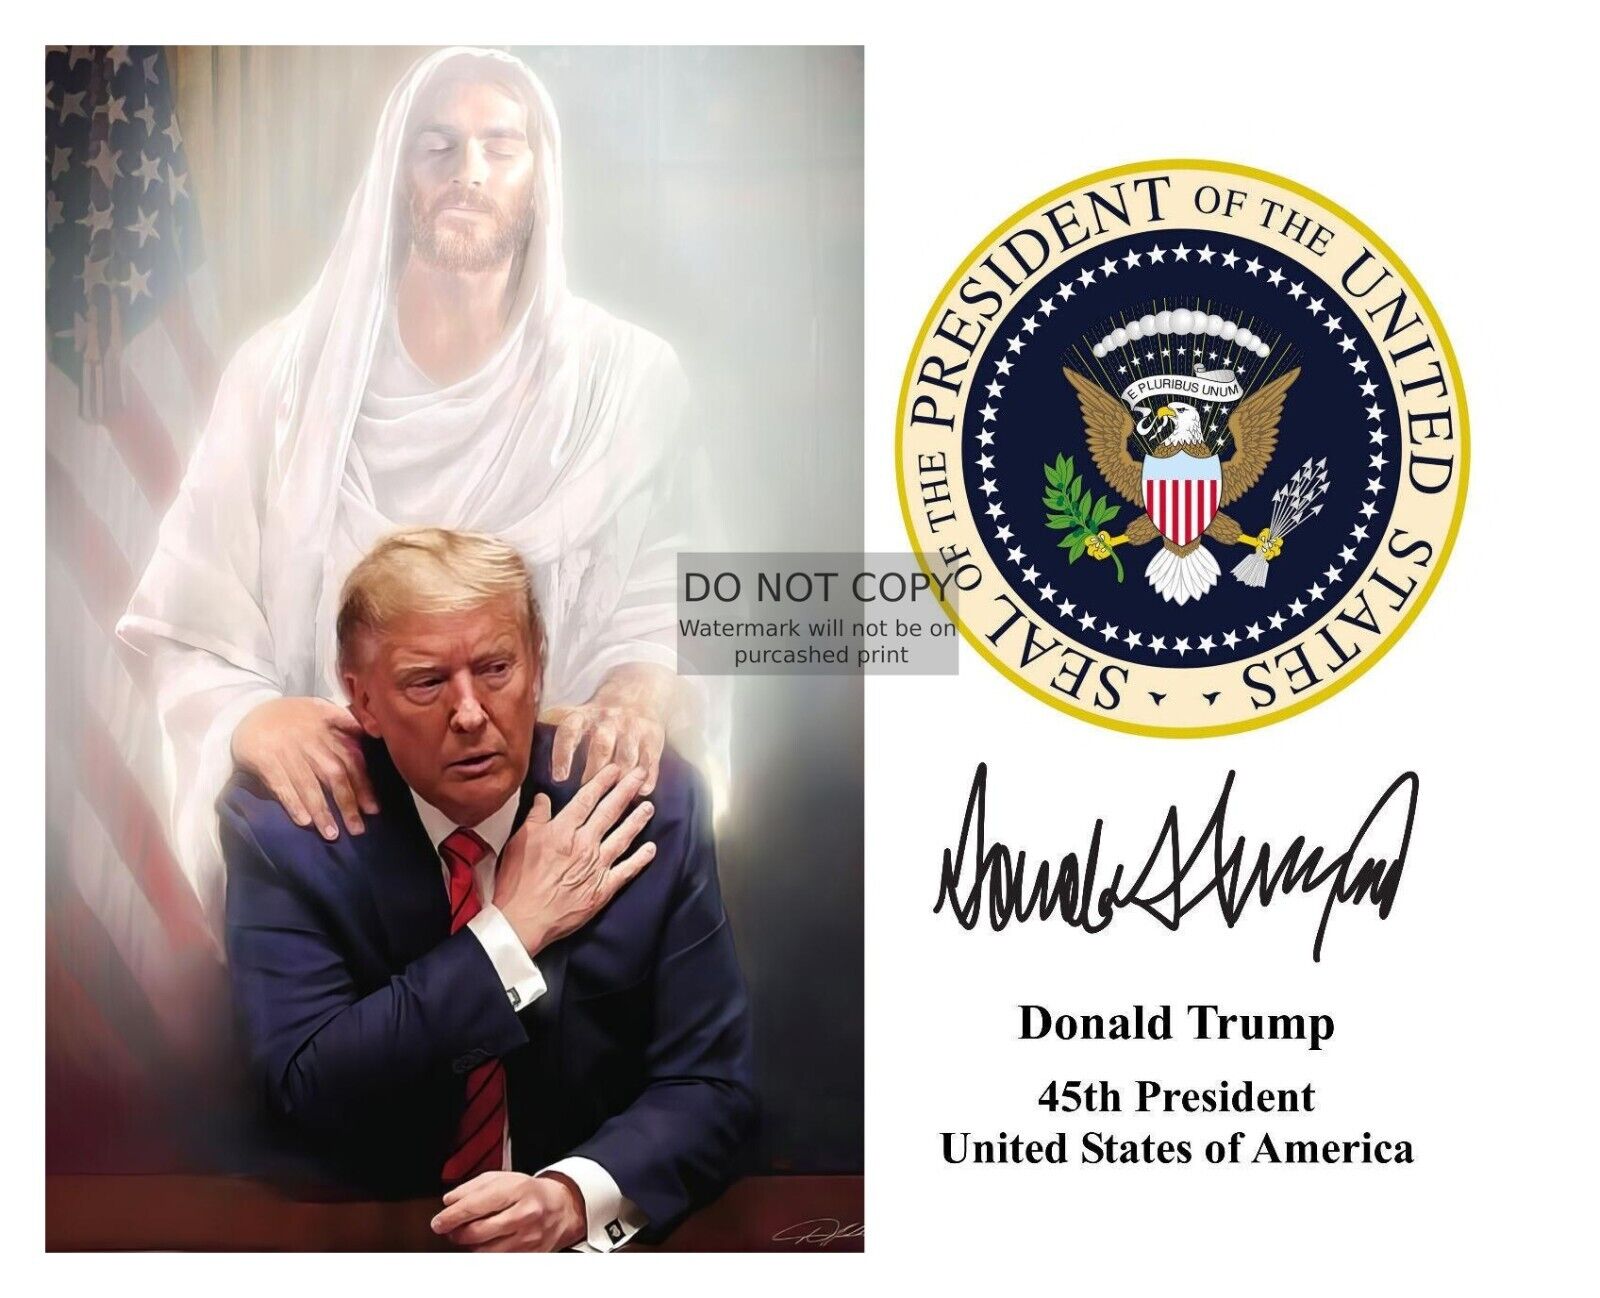 PRESIDENT DONALD TRUMP JESUS HOVERING PRESIDENTIAL SEAL AUTOGRAPHED 8X10 PHOTO